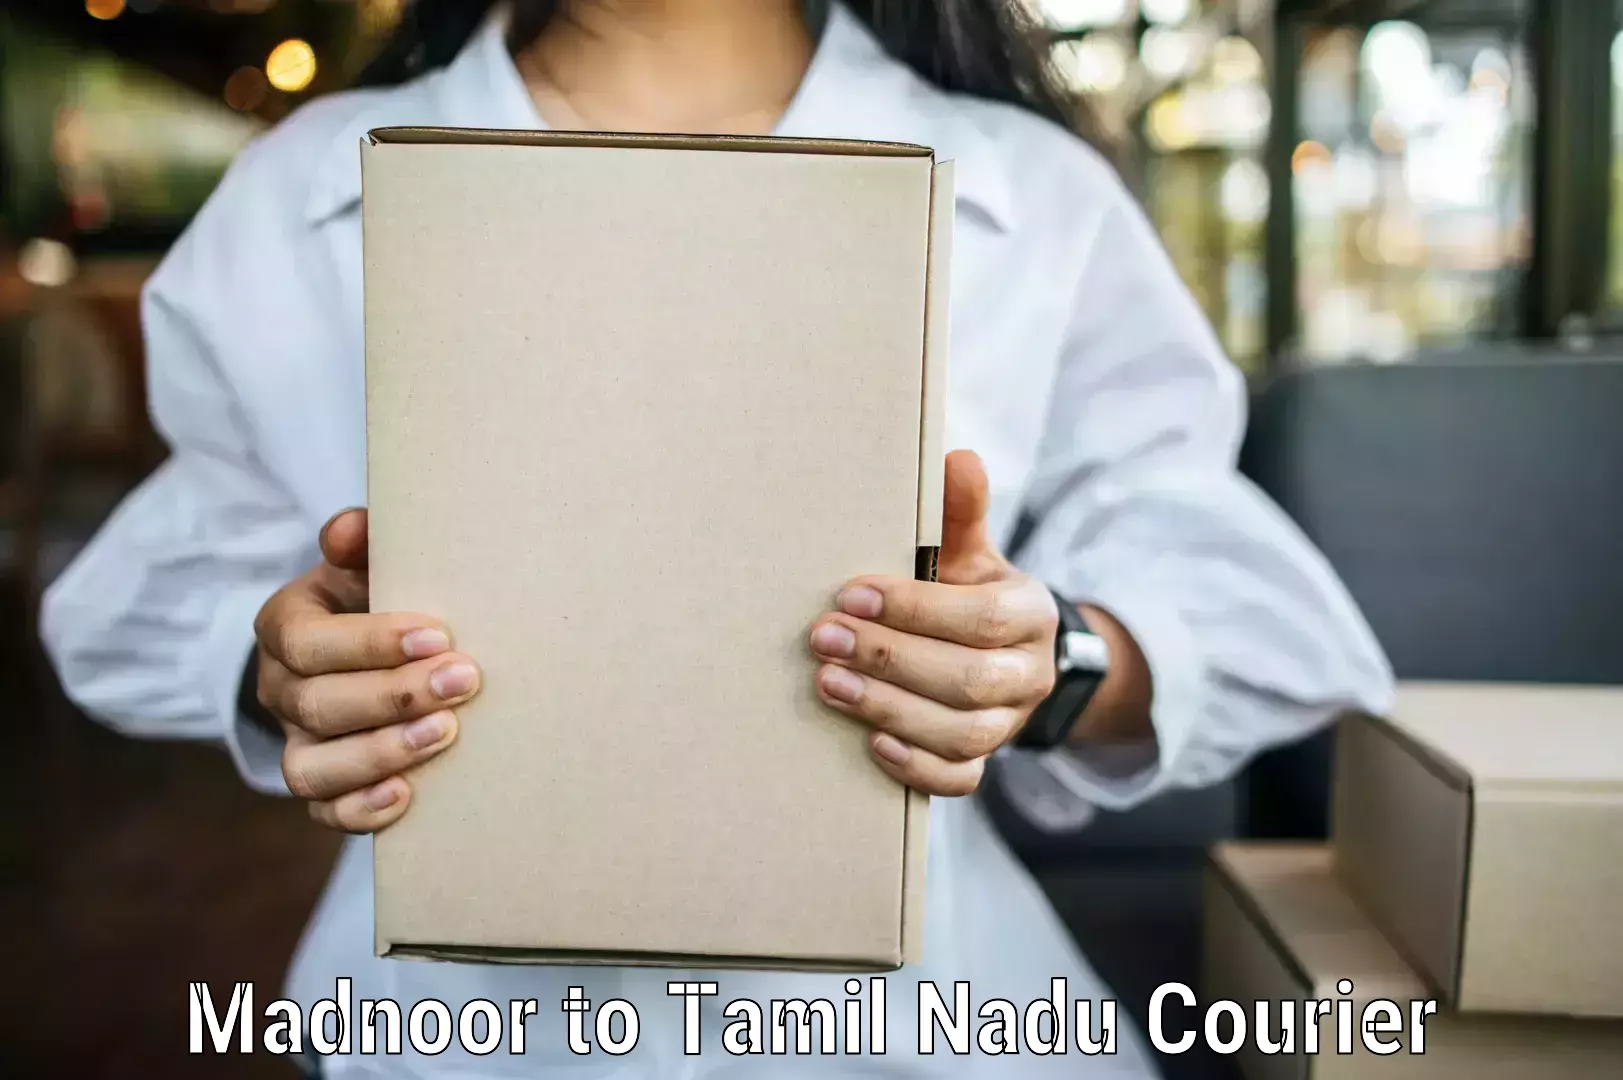 Full-service courier options Madnoor to Thiruvadanai